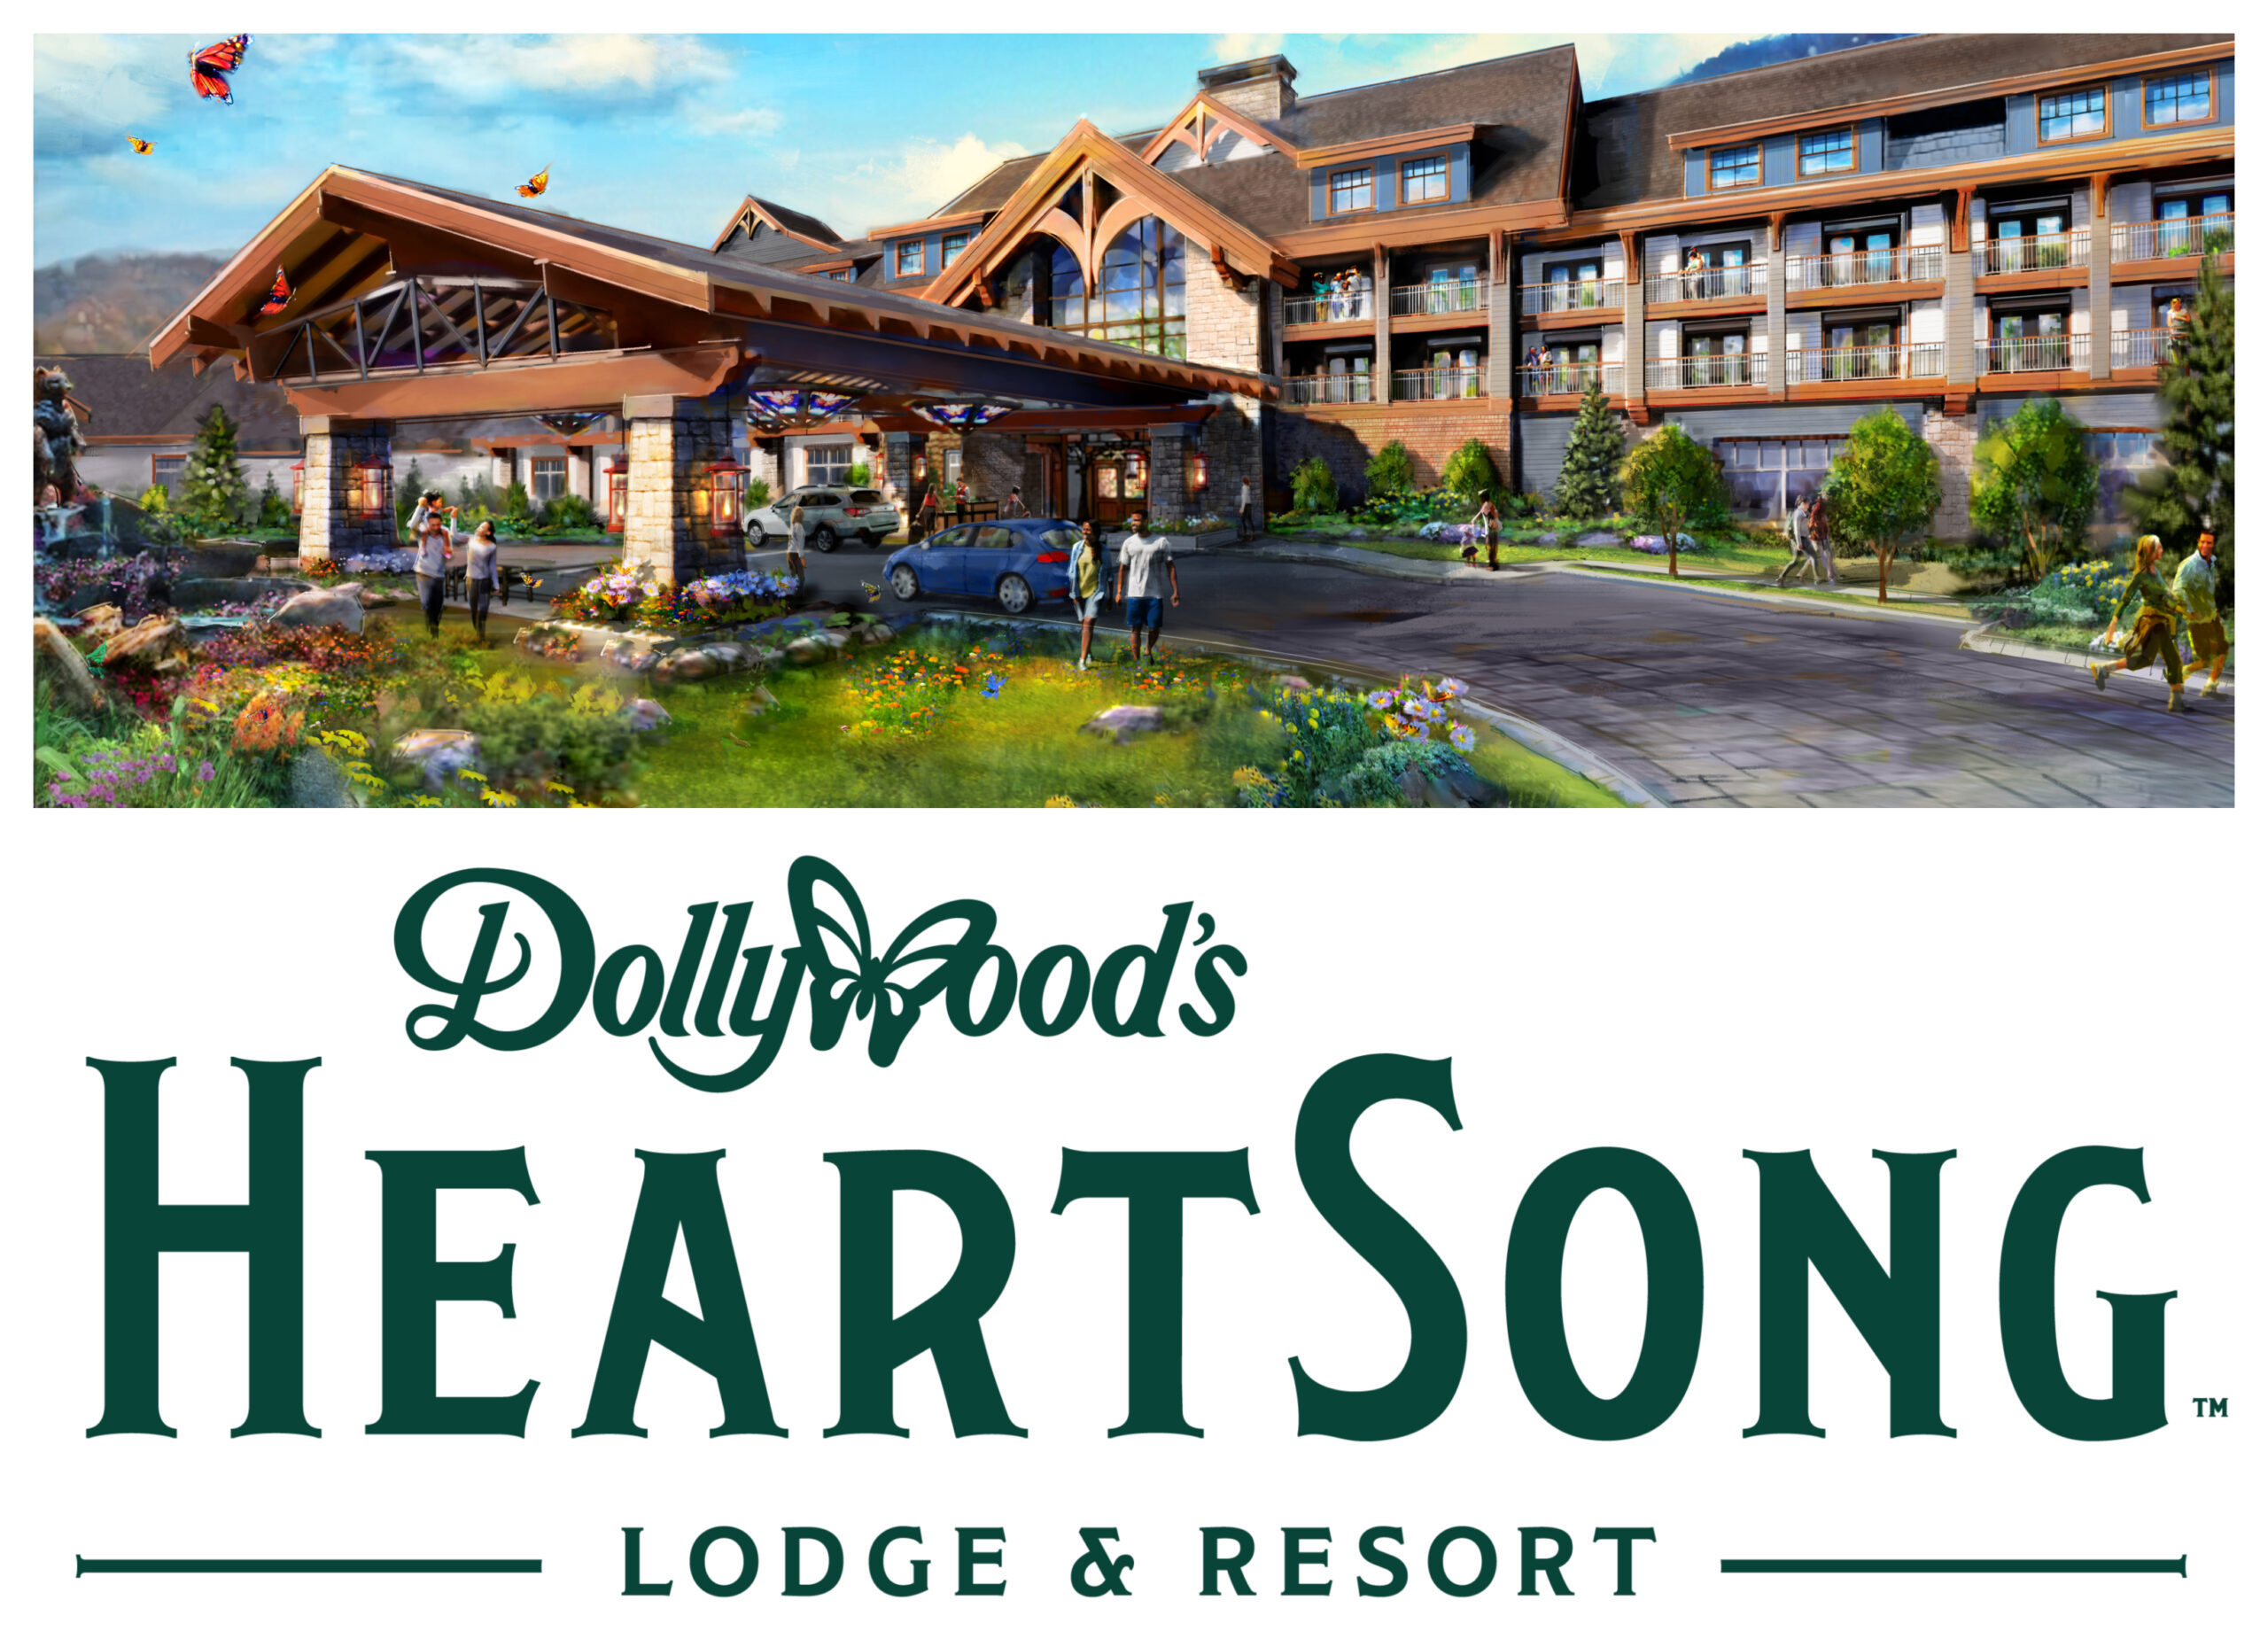 Dolly Parton's Dollywood Announces New Resort Property HeartSong